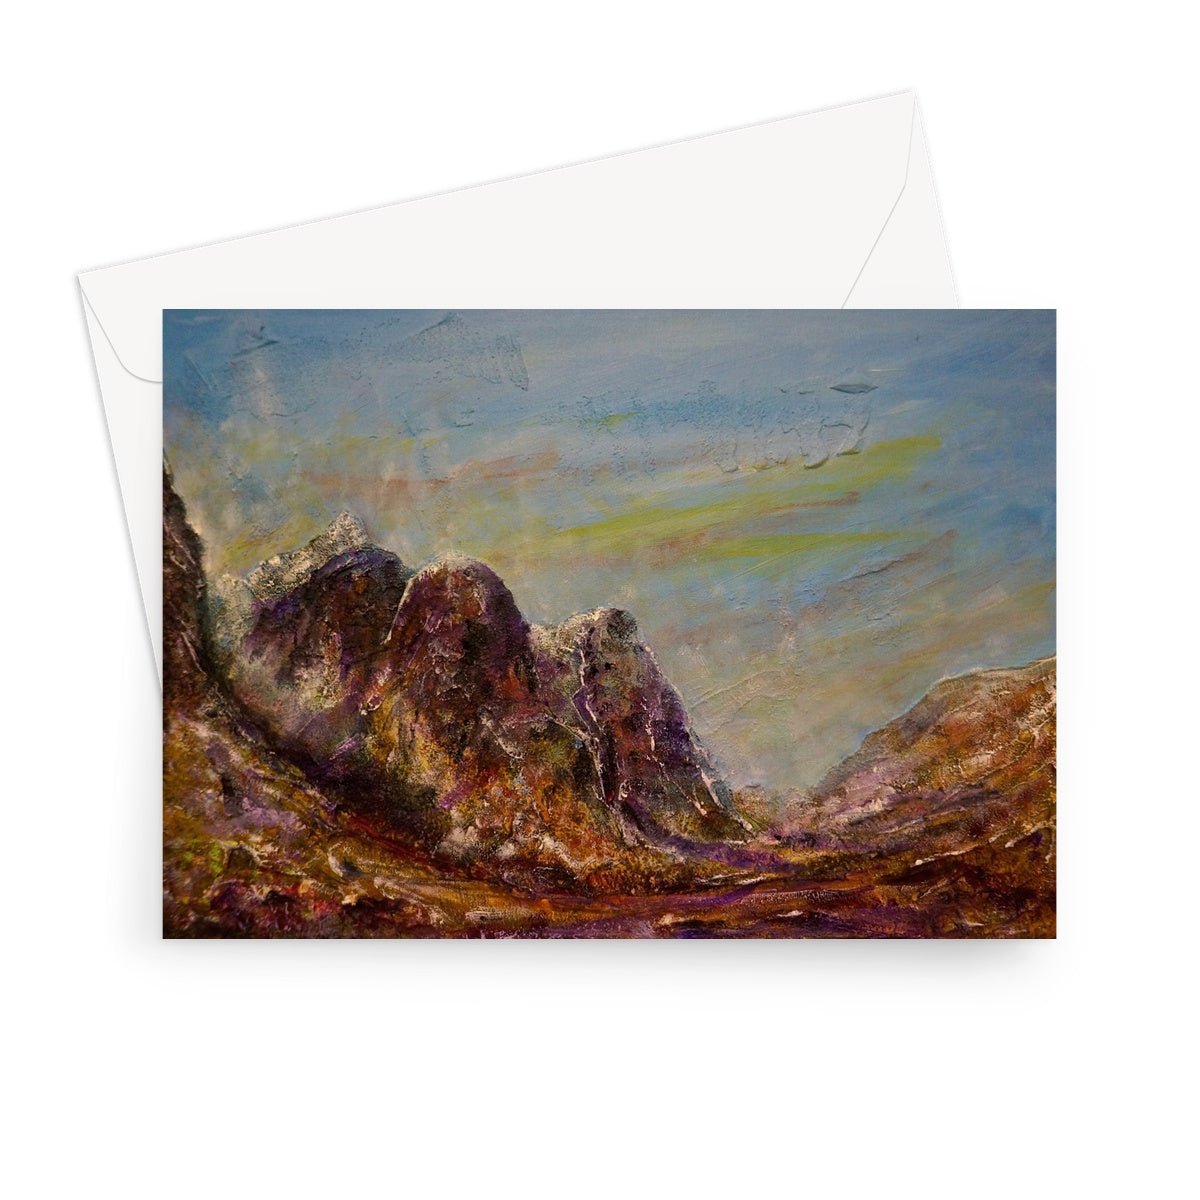 Three Sisters Glencoe Art Gifts Greeting Card-Greetings Cards-Glencoe Art Gallery-7"x5"-10 Cards-Paintings, Prints, Homeware, Art Gifts From Scotland By Scottish Artist Kevin Hunter